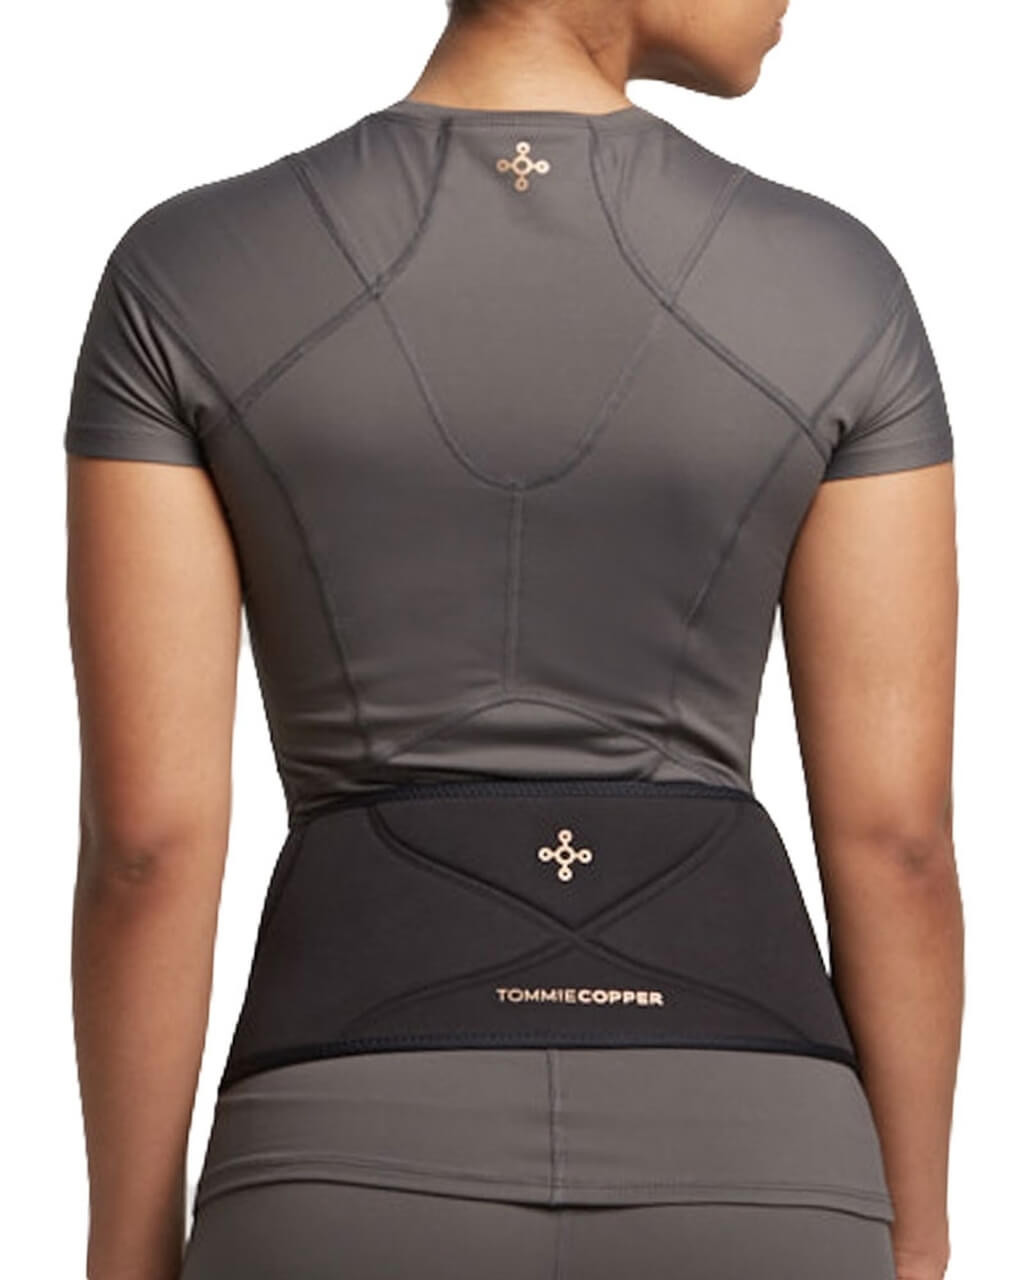 Tommie Copper™ on X: Have you tried our Comfort Back Brace yet